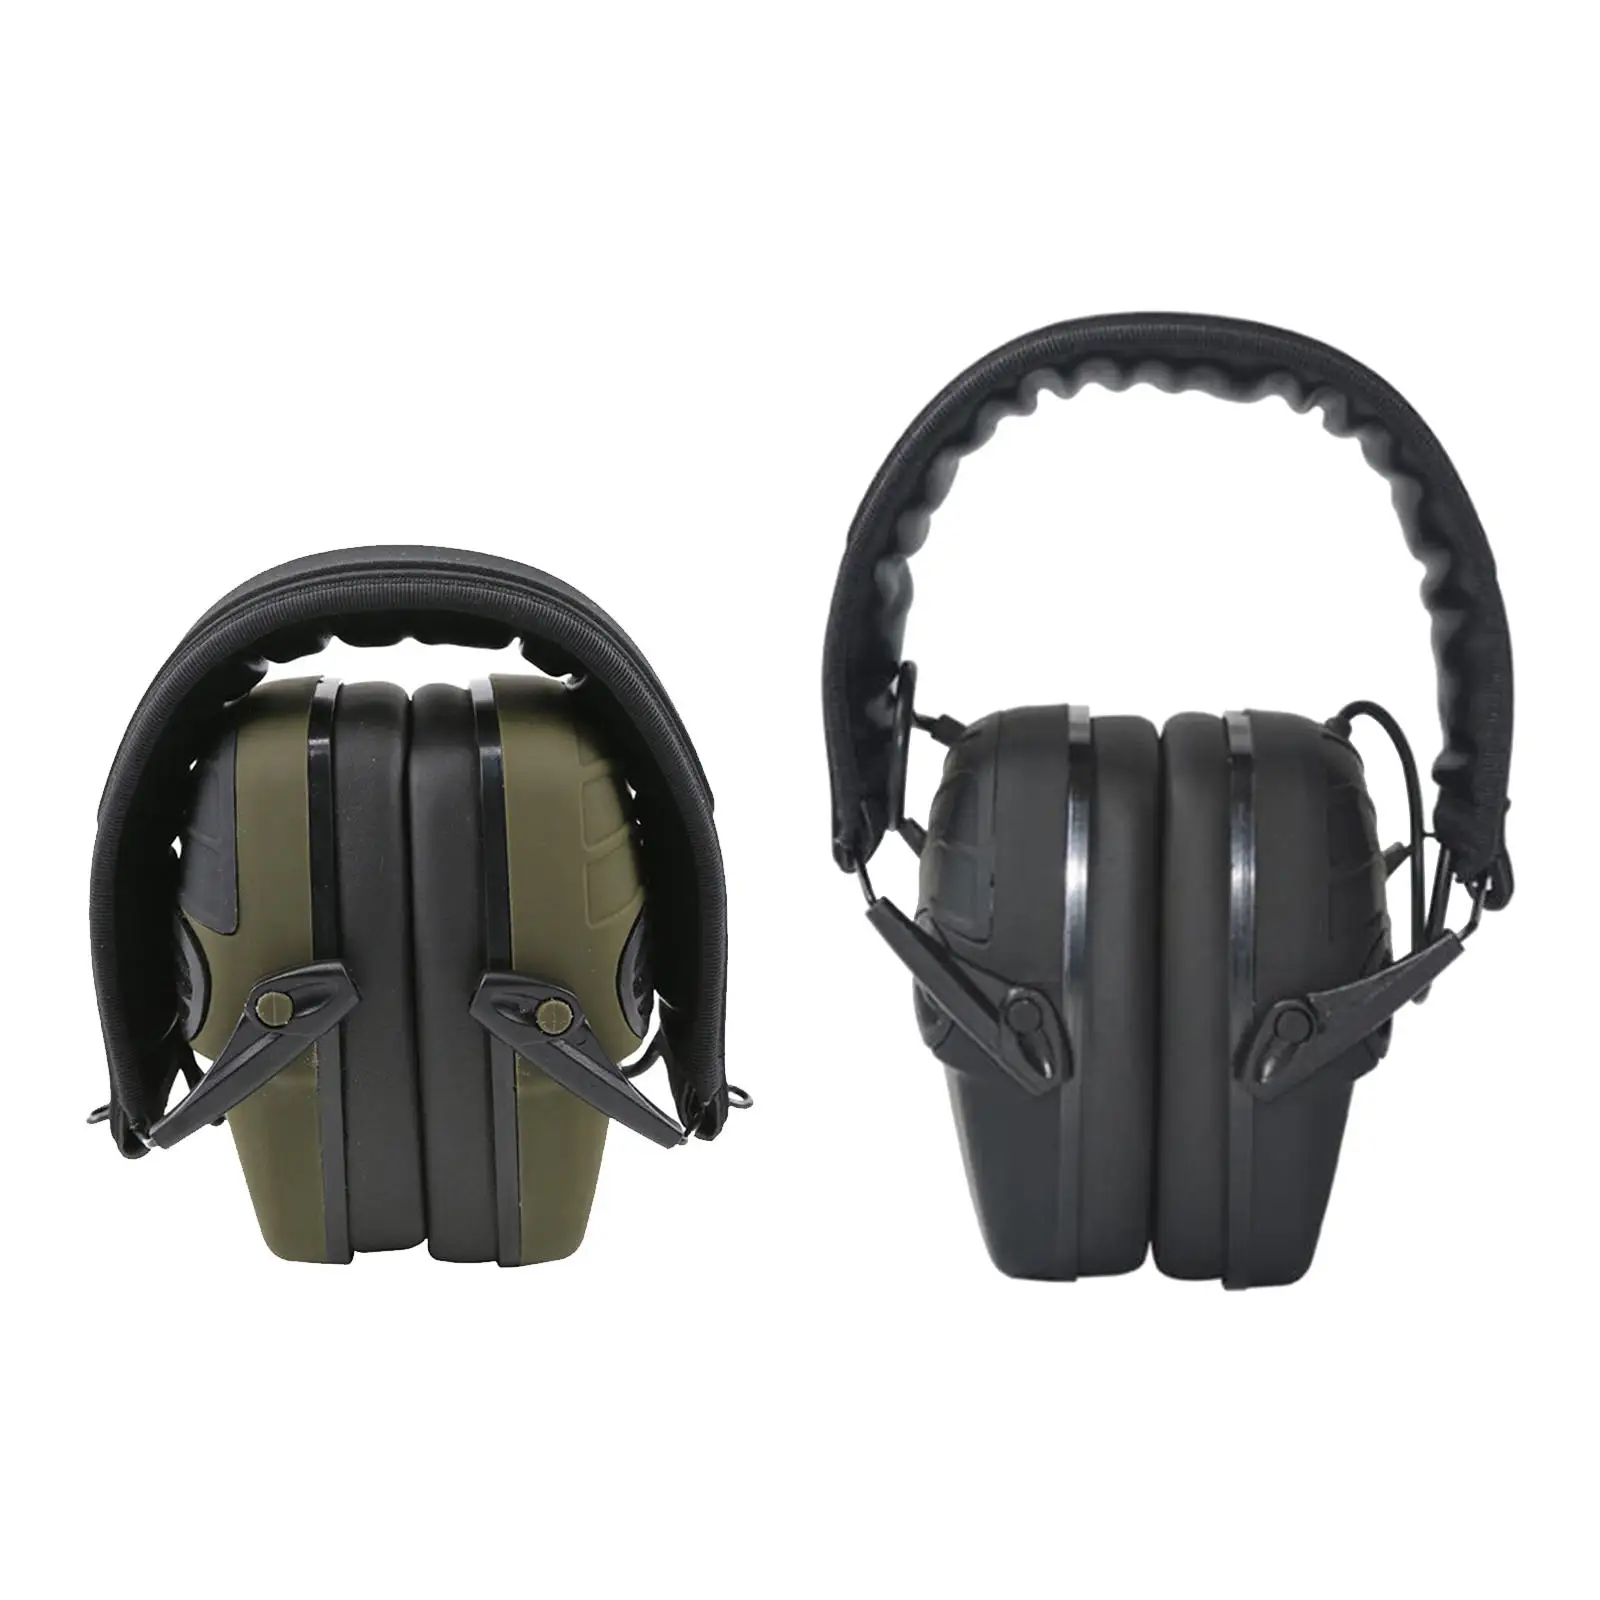 Tactical anti-noise Earmuff for Hunting shooting headphones Noise reduction Electronic Hearing Ear Protection Headphones